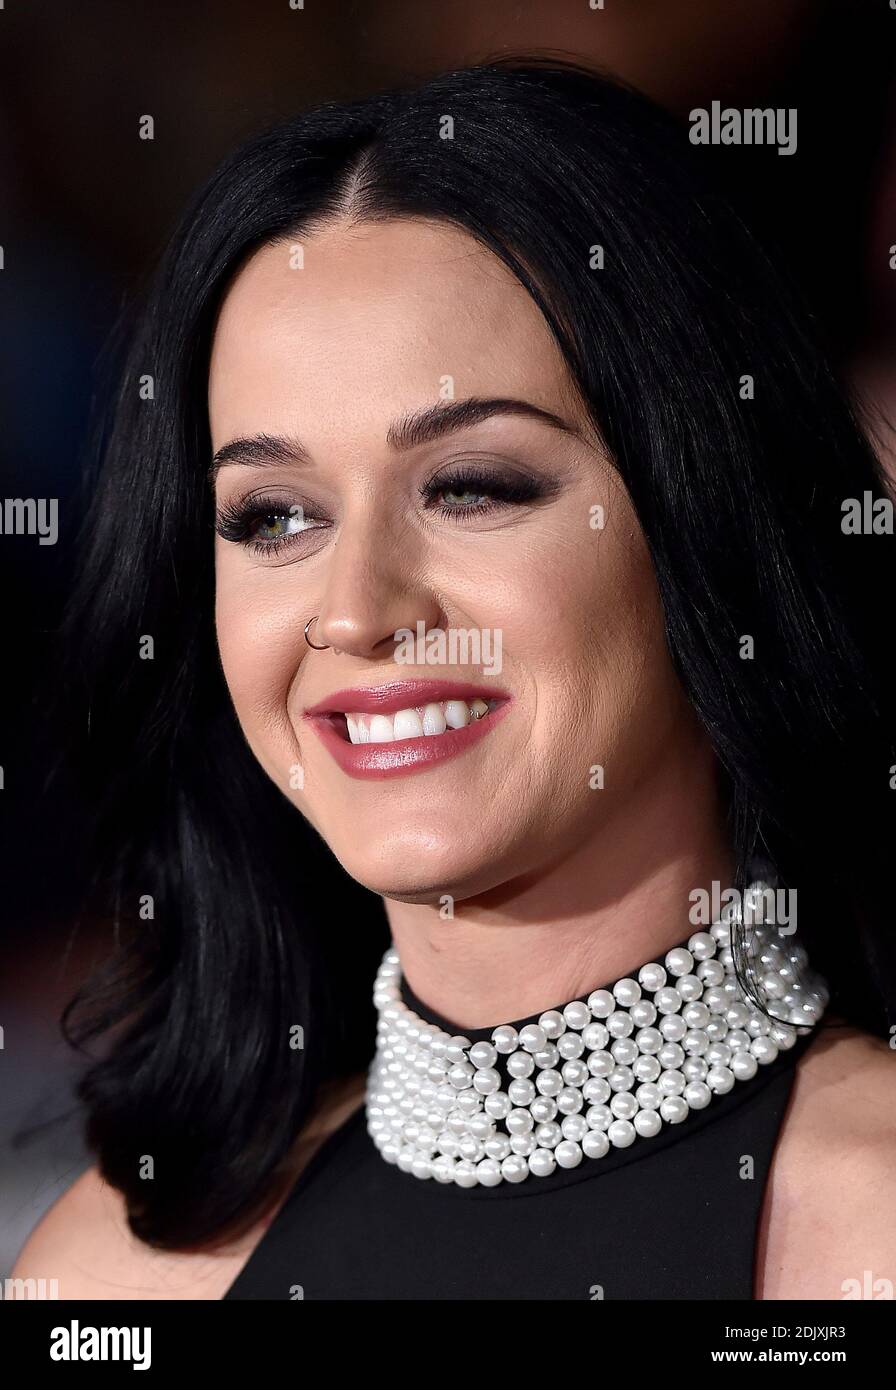 Katy Perry still wearing her Nike gold tooth jewelry attends the premiere  of Paramount Pictures' 'Office Christmas Party' at Regency Village Theatre  on December 7, 2016 in Los Angeles, California. Photo by